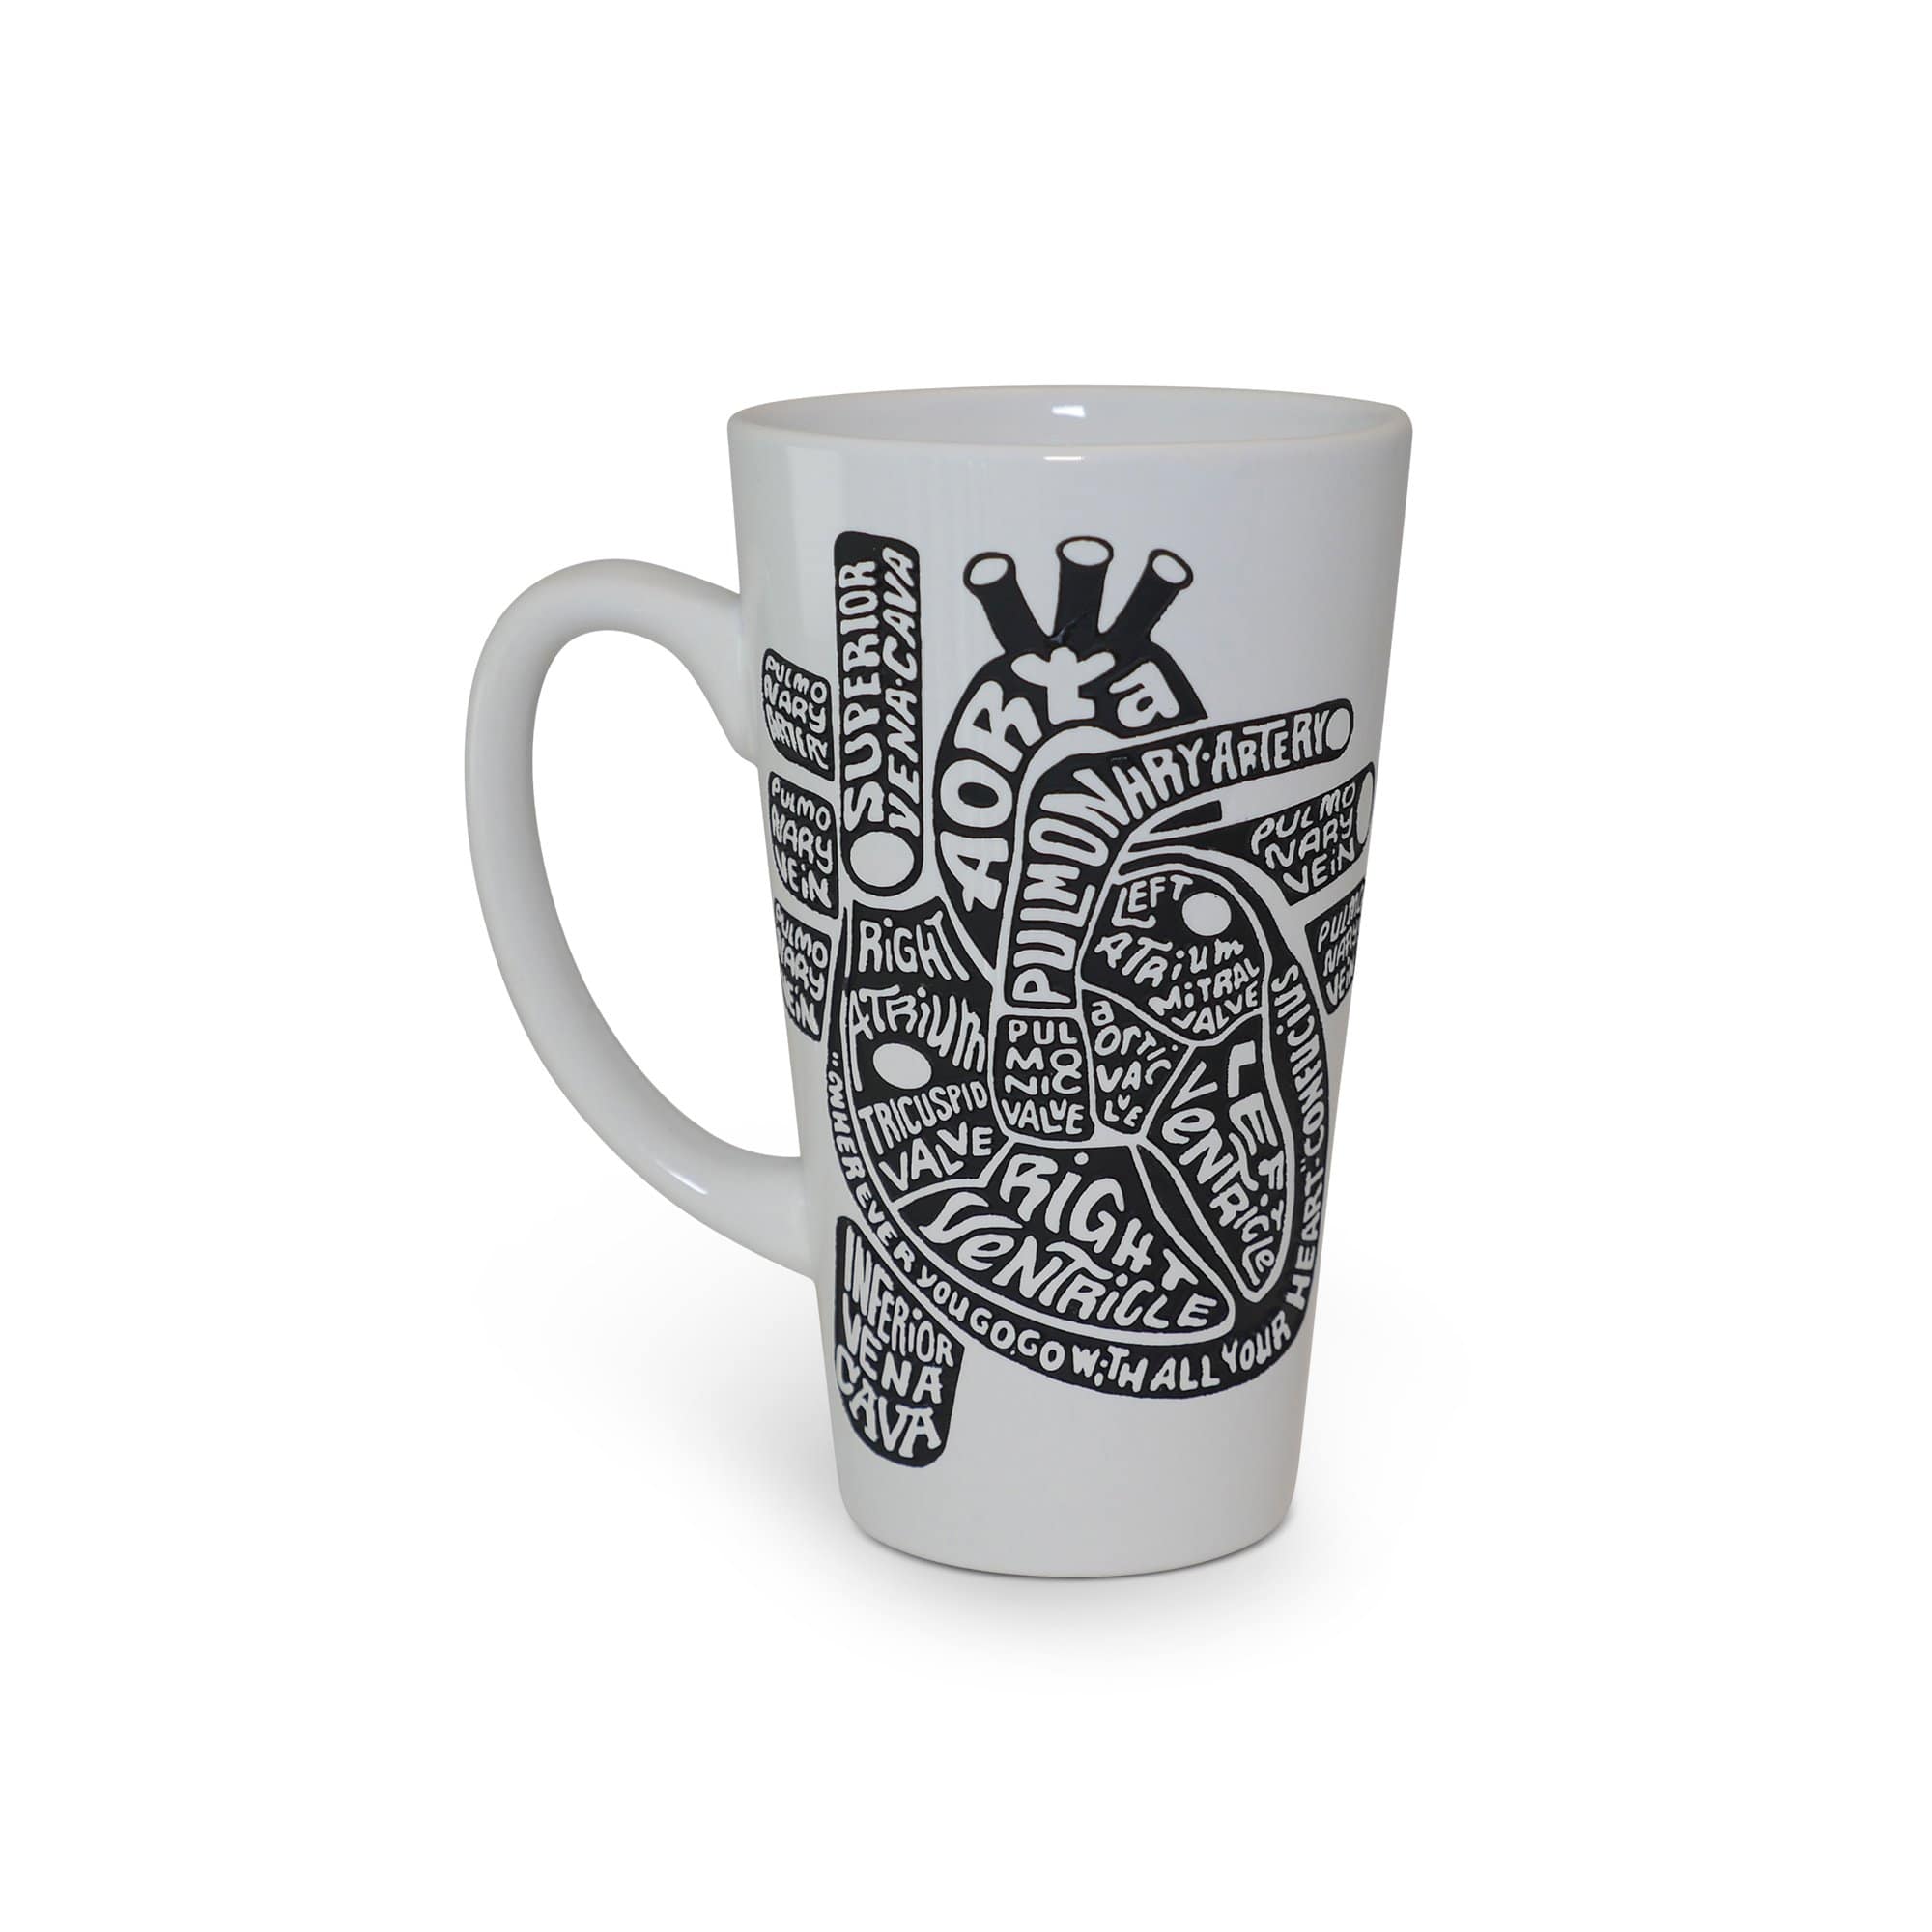 Limited Edition Porcelain Etched Heart Typography Mug - White